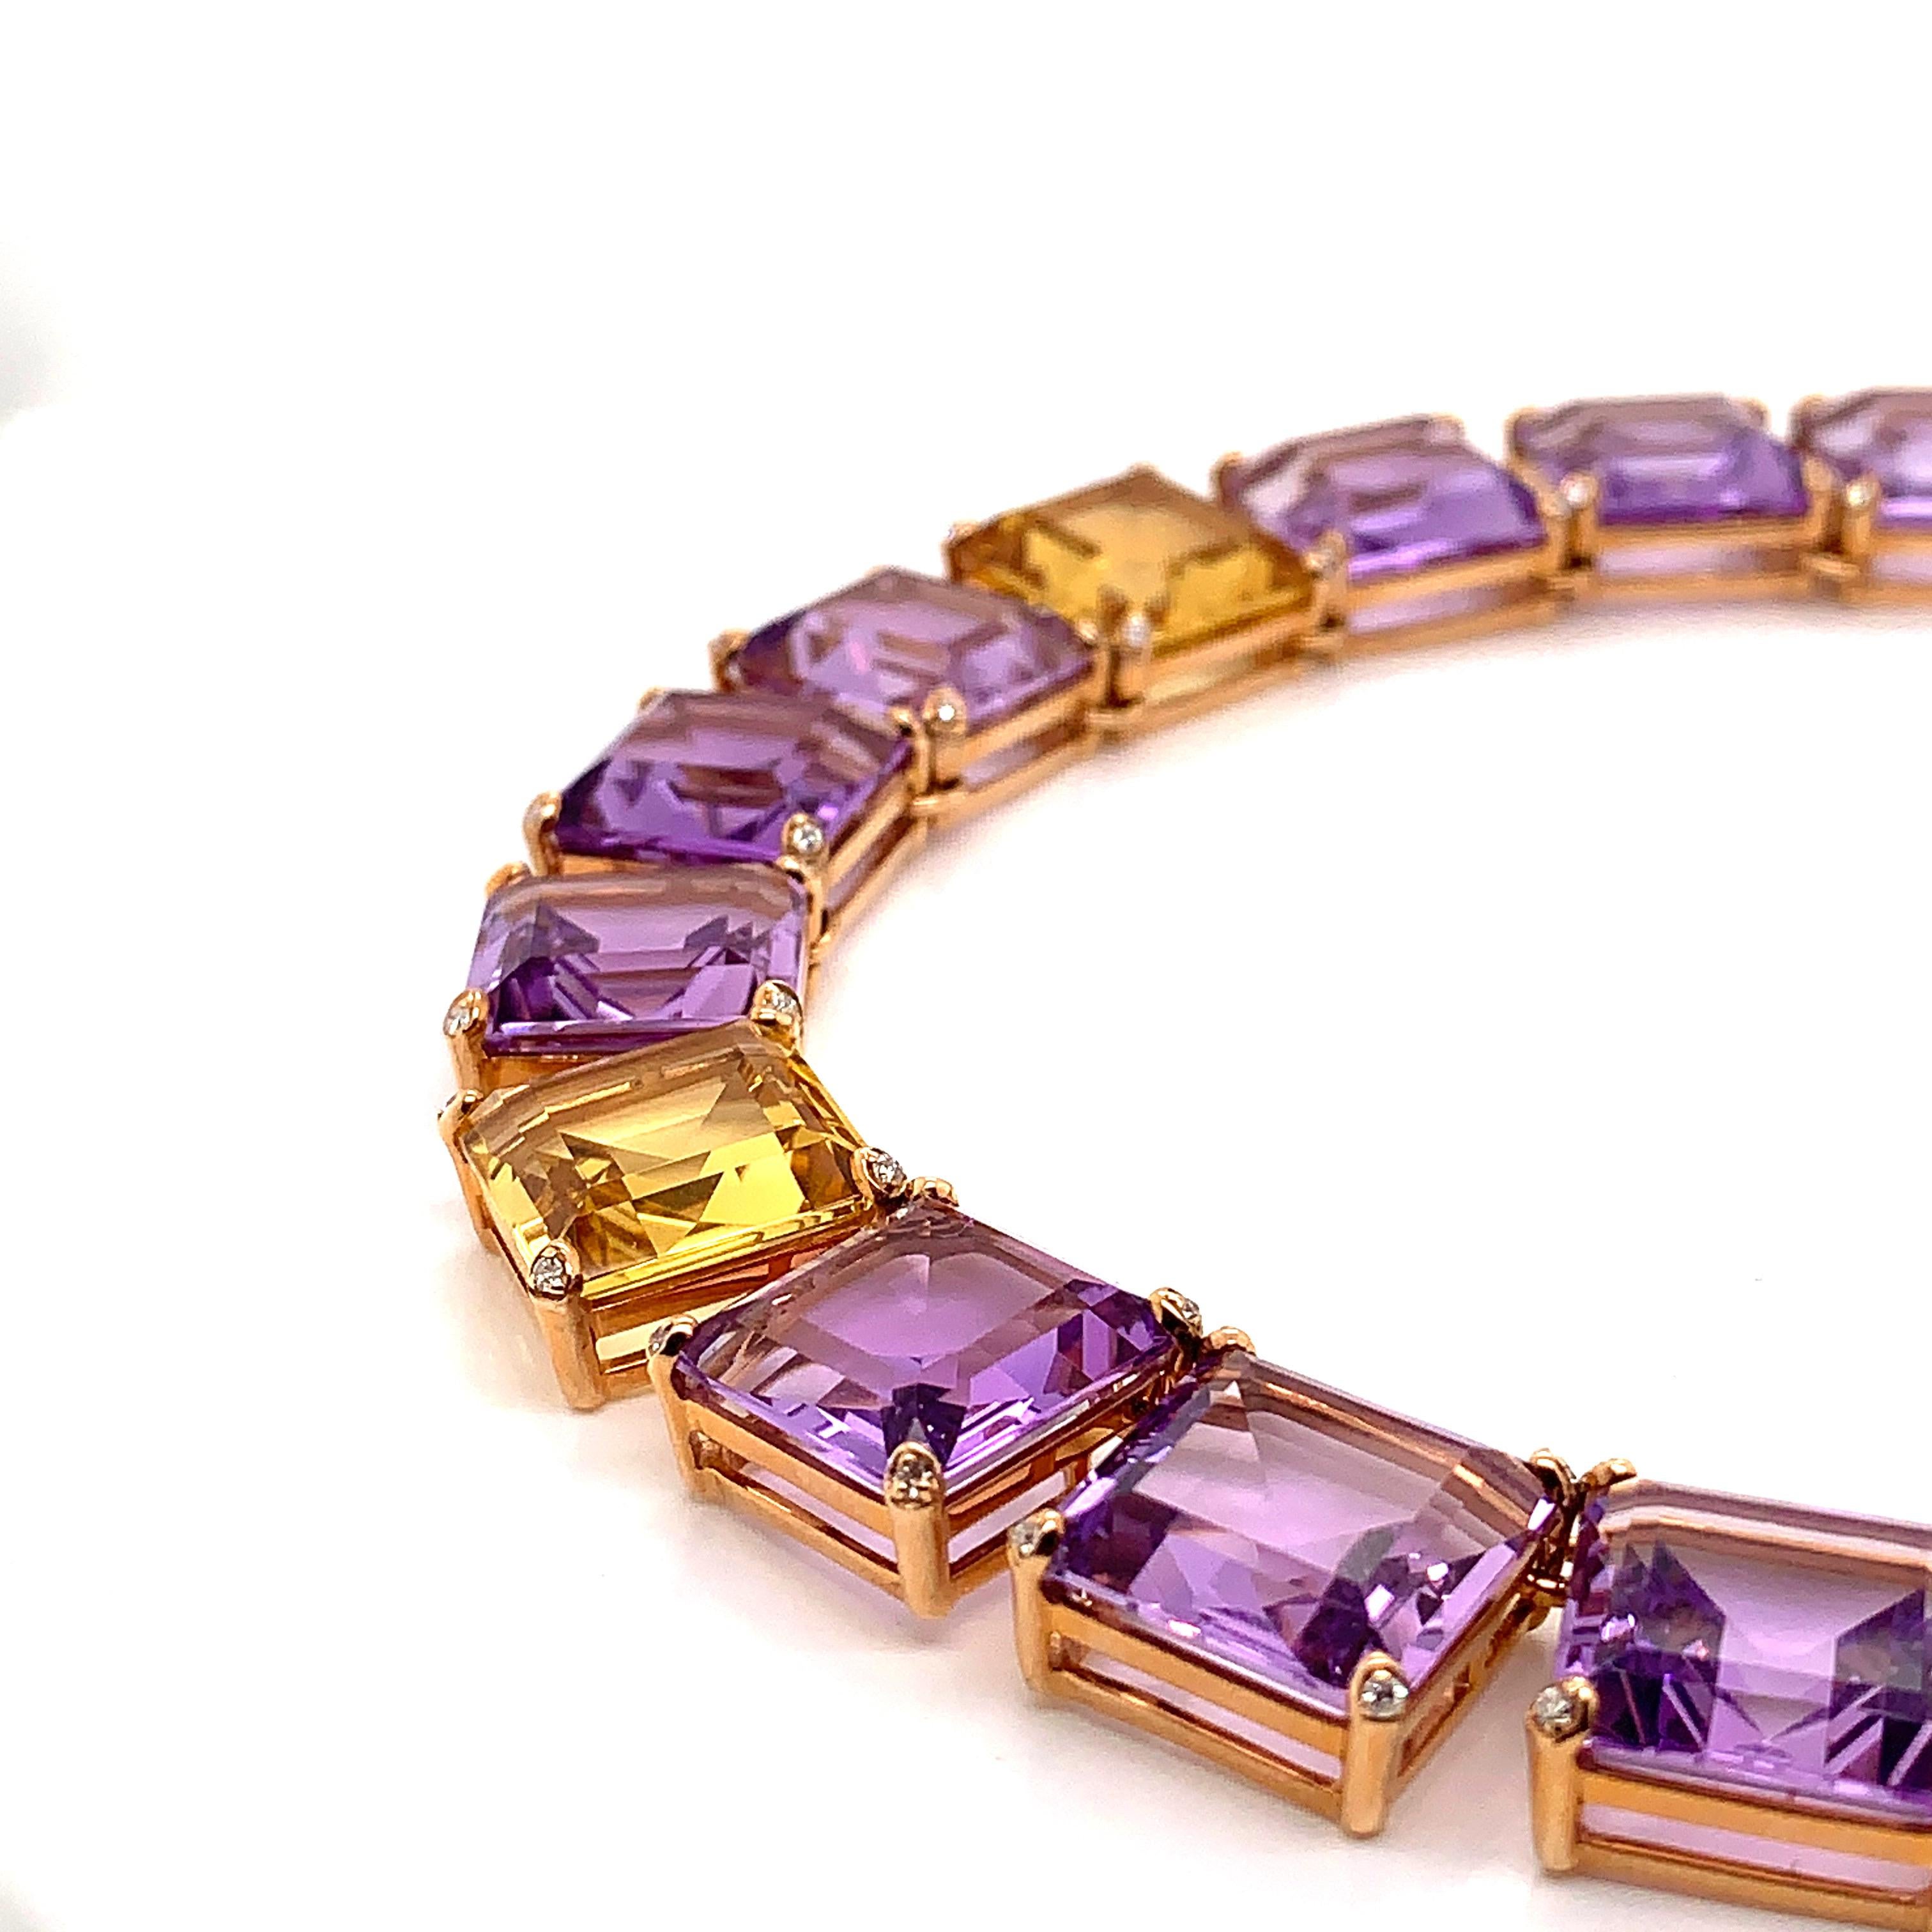 Glamorous Gemstones - Sunita Nahata started off her career as a gemstone trader, and this particular collection reflects her love for multi-coloured semi-precious gemstones. This necklace features over a hundred and twenty carats of semi previous